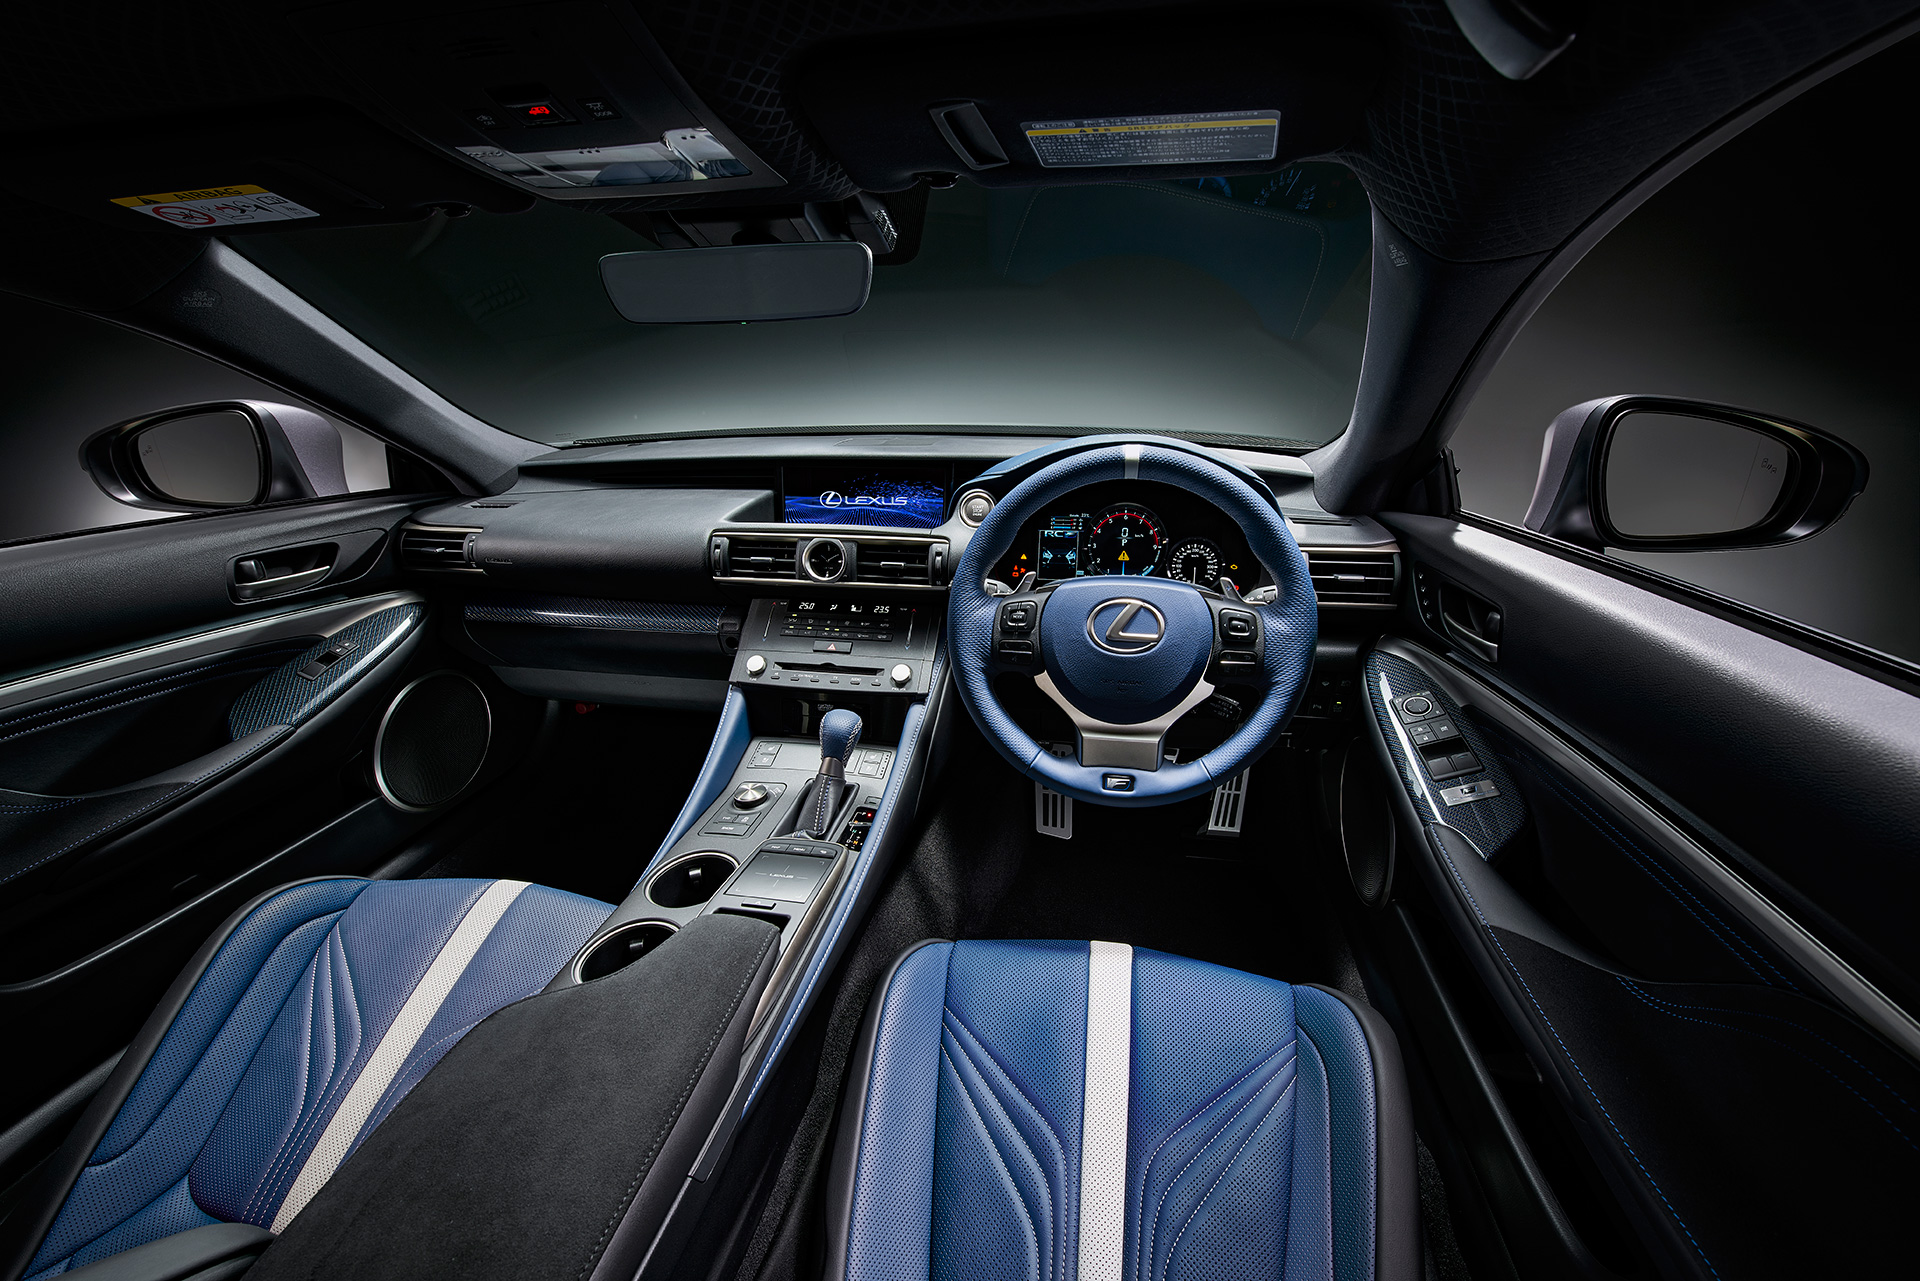 Special-specification, limited-edition RC F